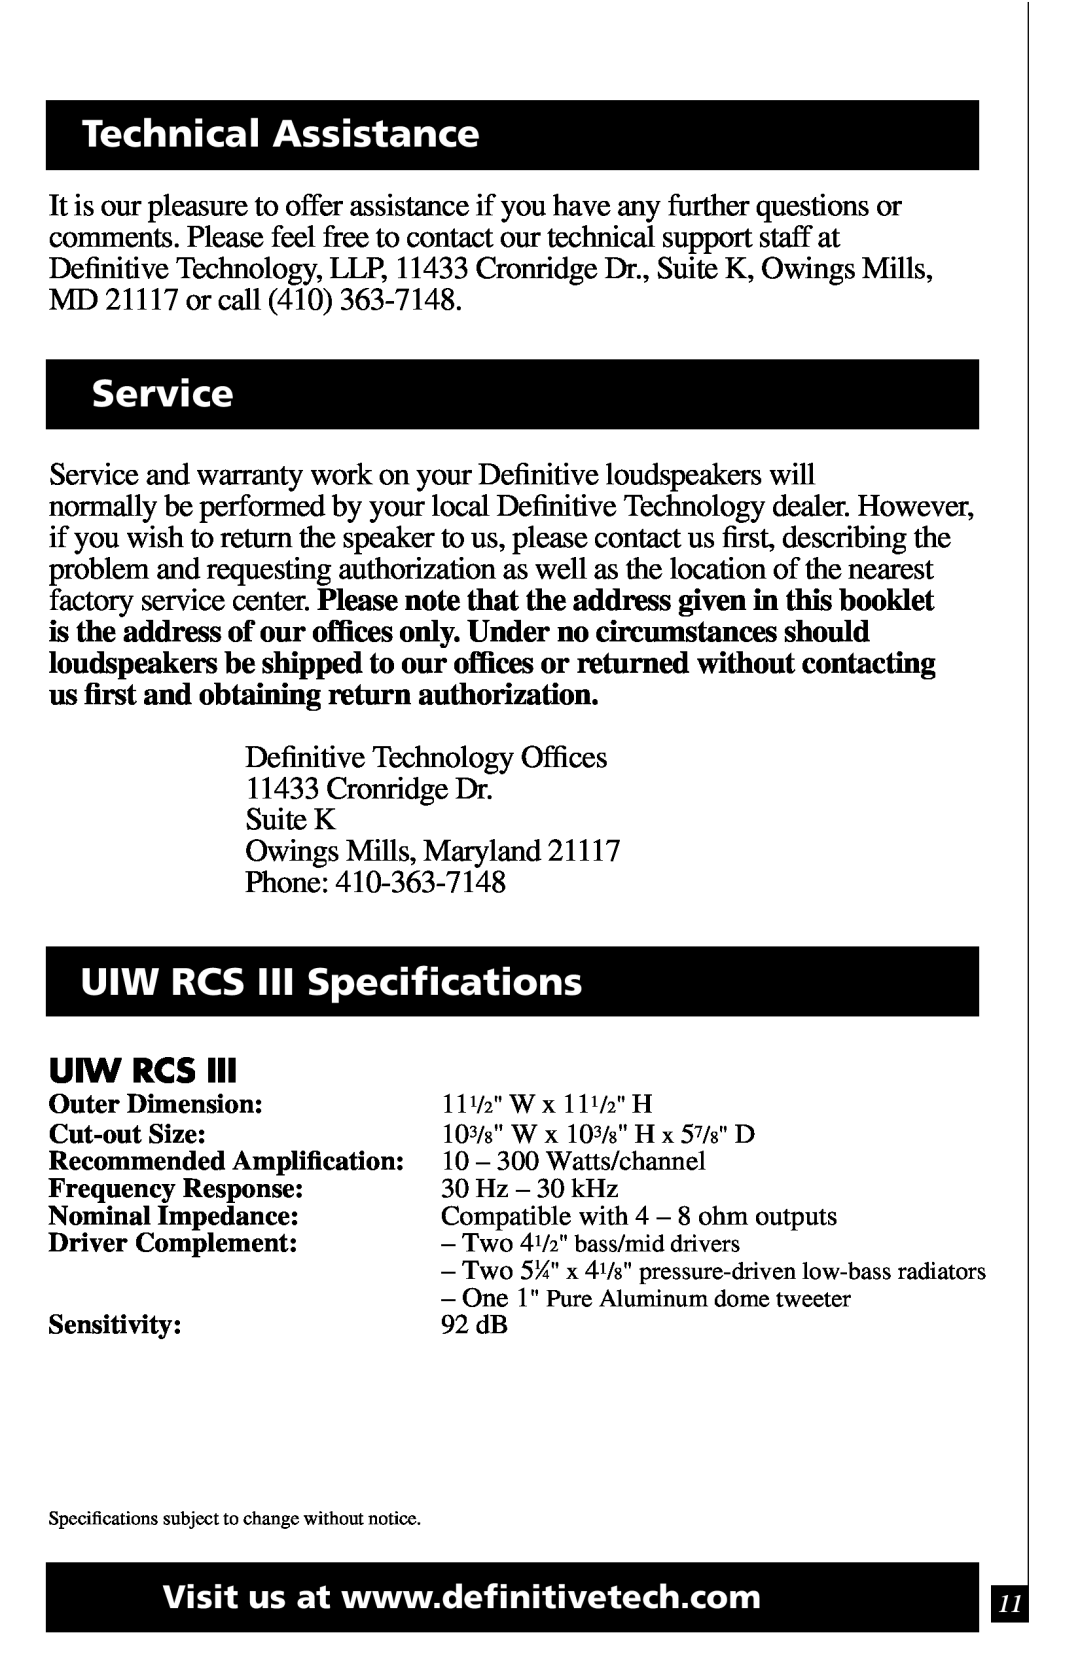 Definitive Technology Reference Series In-Ceiling Speaker Technical Assistance, Service, UIW RCS III Speciﬁcations 